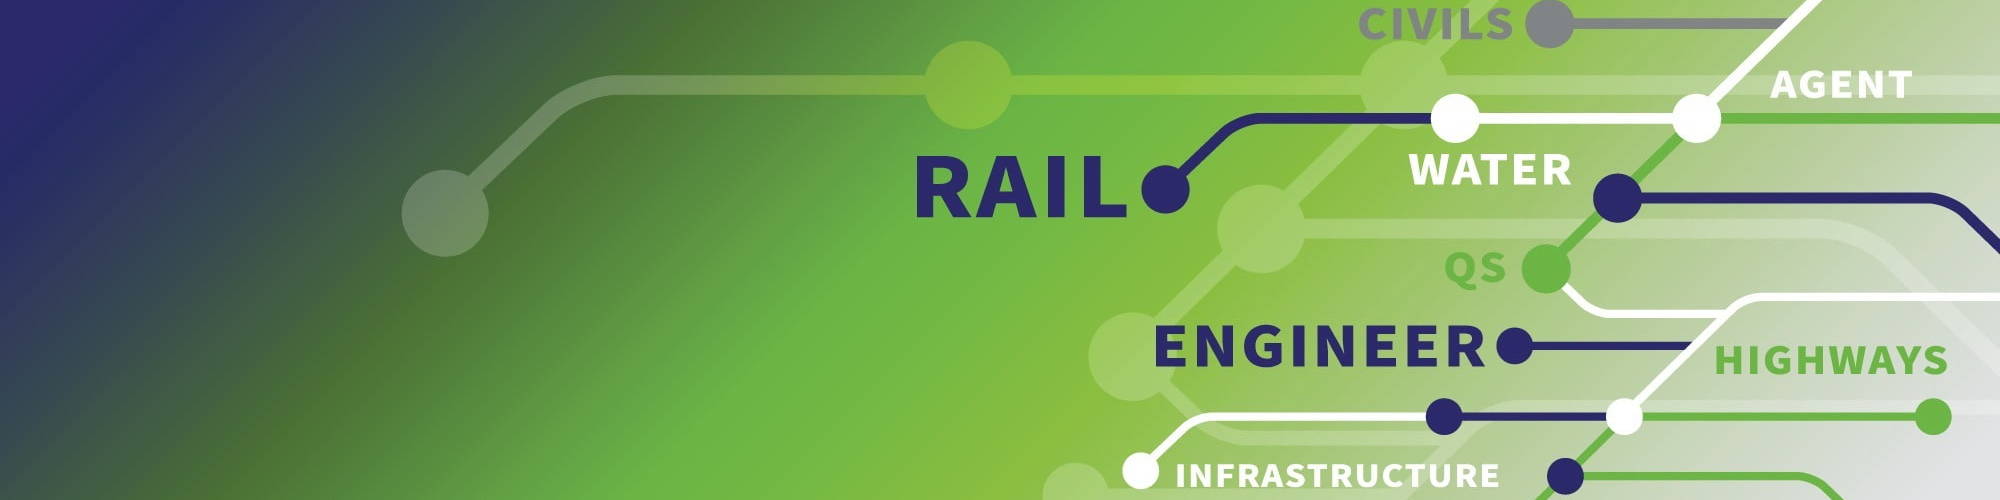 Green graphic with train lines with the words Rail, Water, Engineer, Agent, QS and Civils